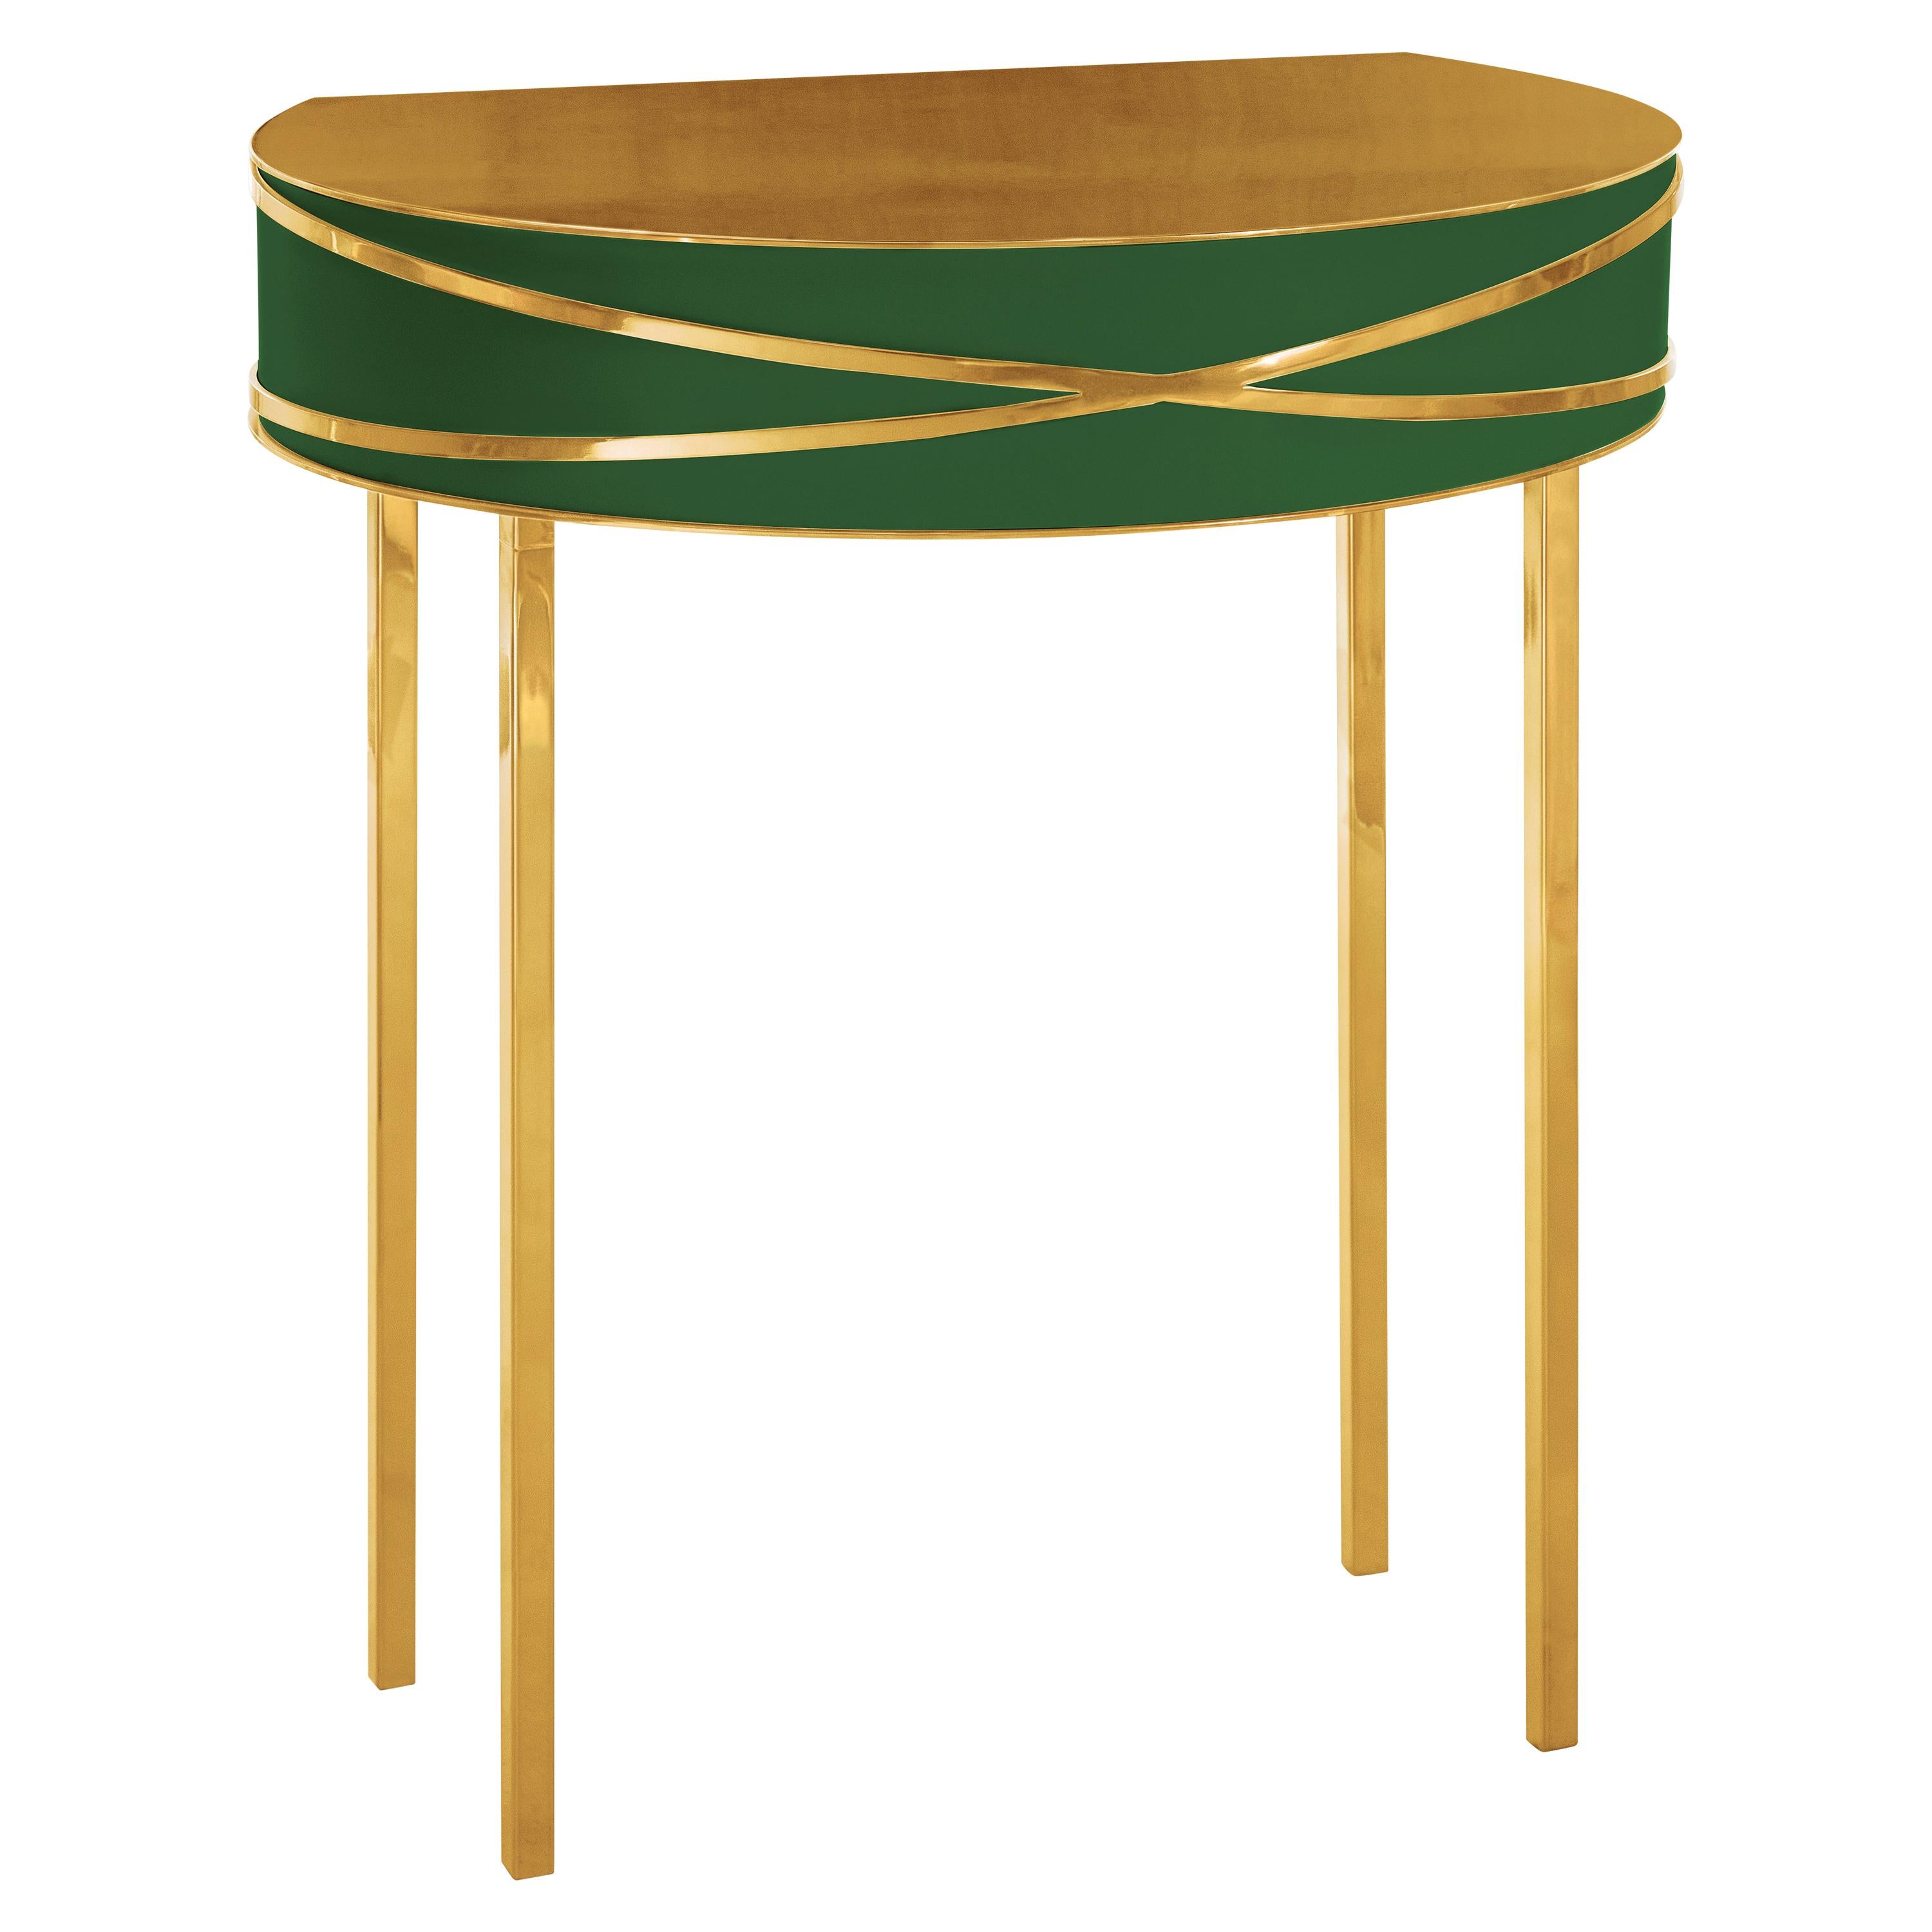 Stella Green Console or Bedside Table with Gold Trims by Nika Zupanc